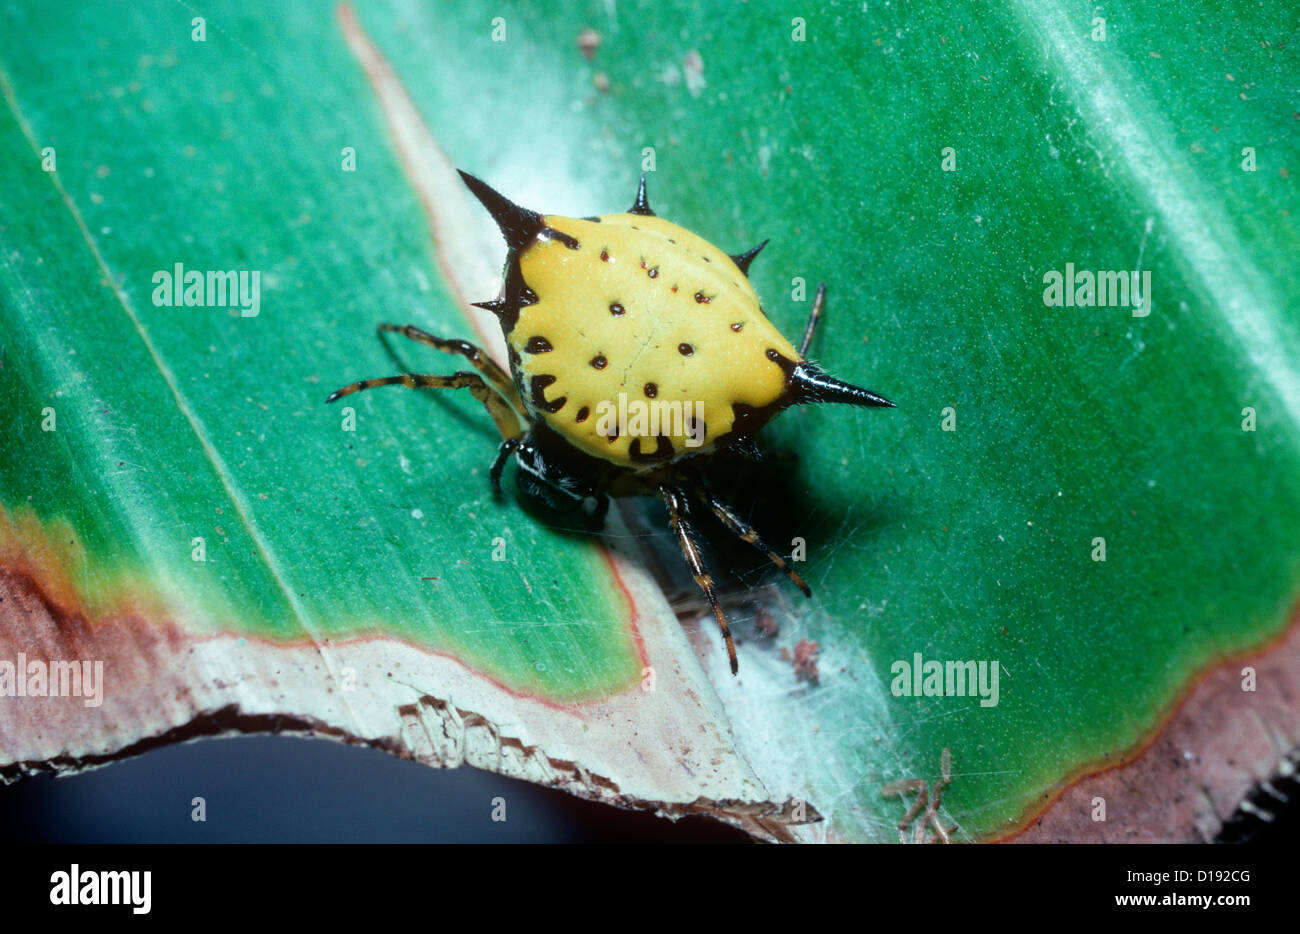 Hasselts spiny orb weaver spider (Gasteracantha hasselti: Araneidae) female in rainforest, Thailand Stock Photo